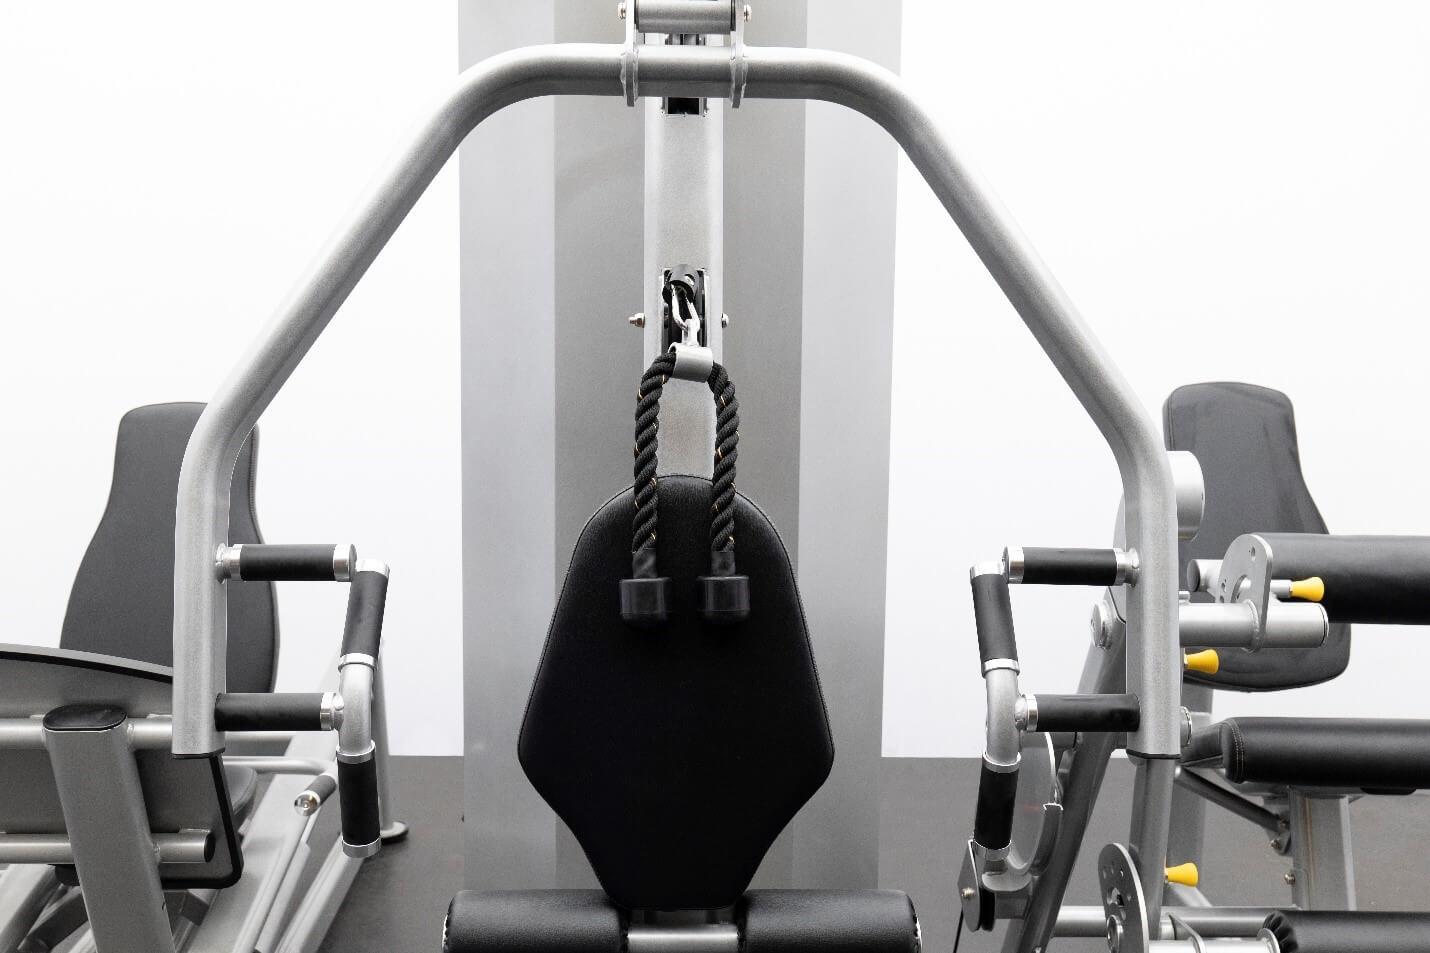 3 Use- Chest Press/Seated Row/Lat Pulldown Station